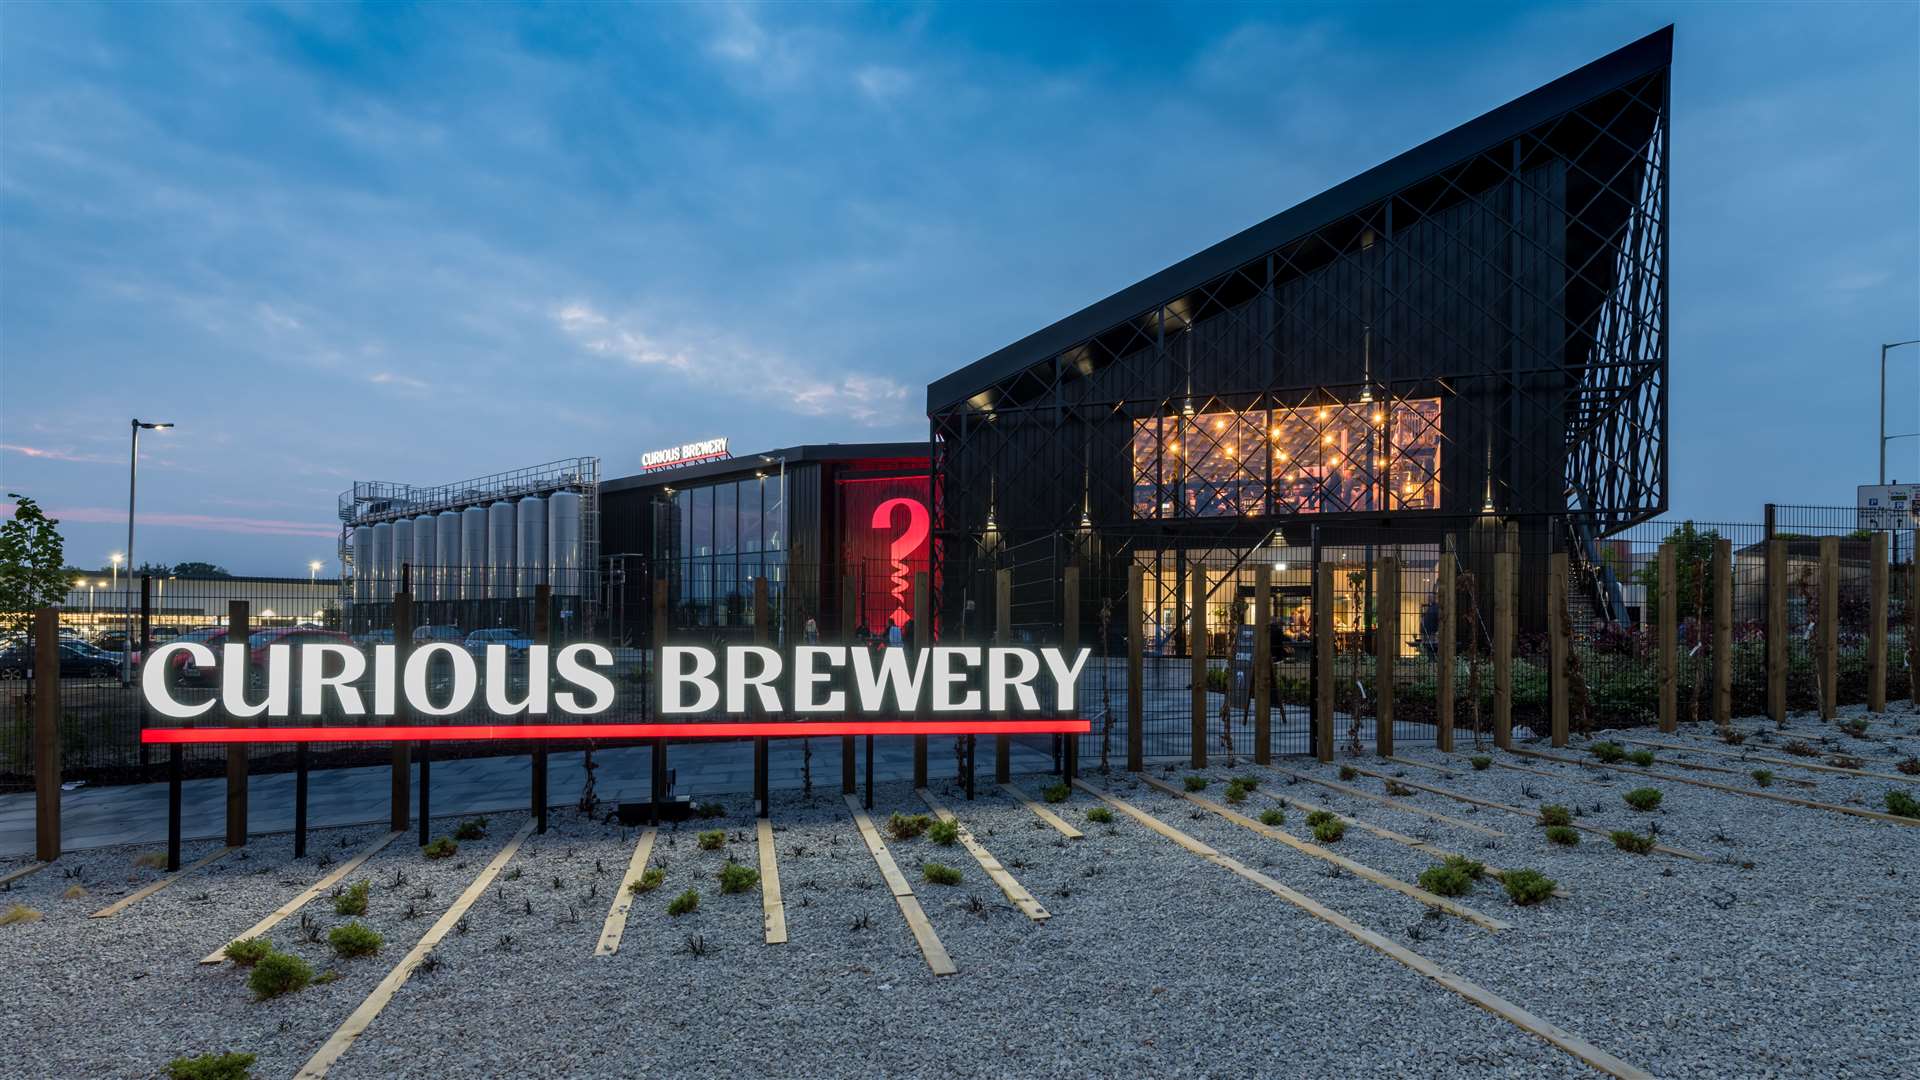 The Curious Brewery in Ashford has added to its beer line-up